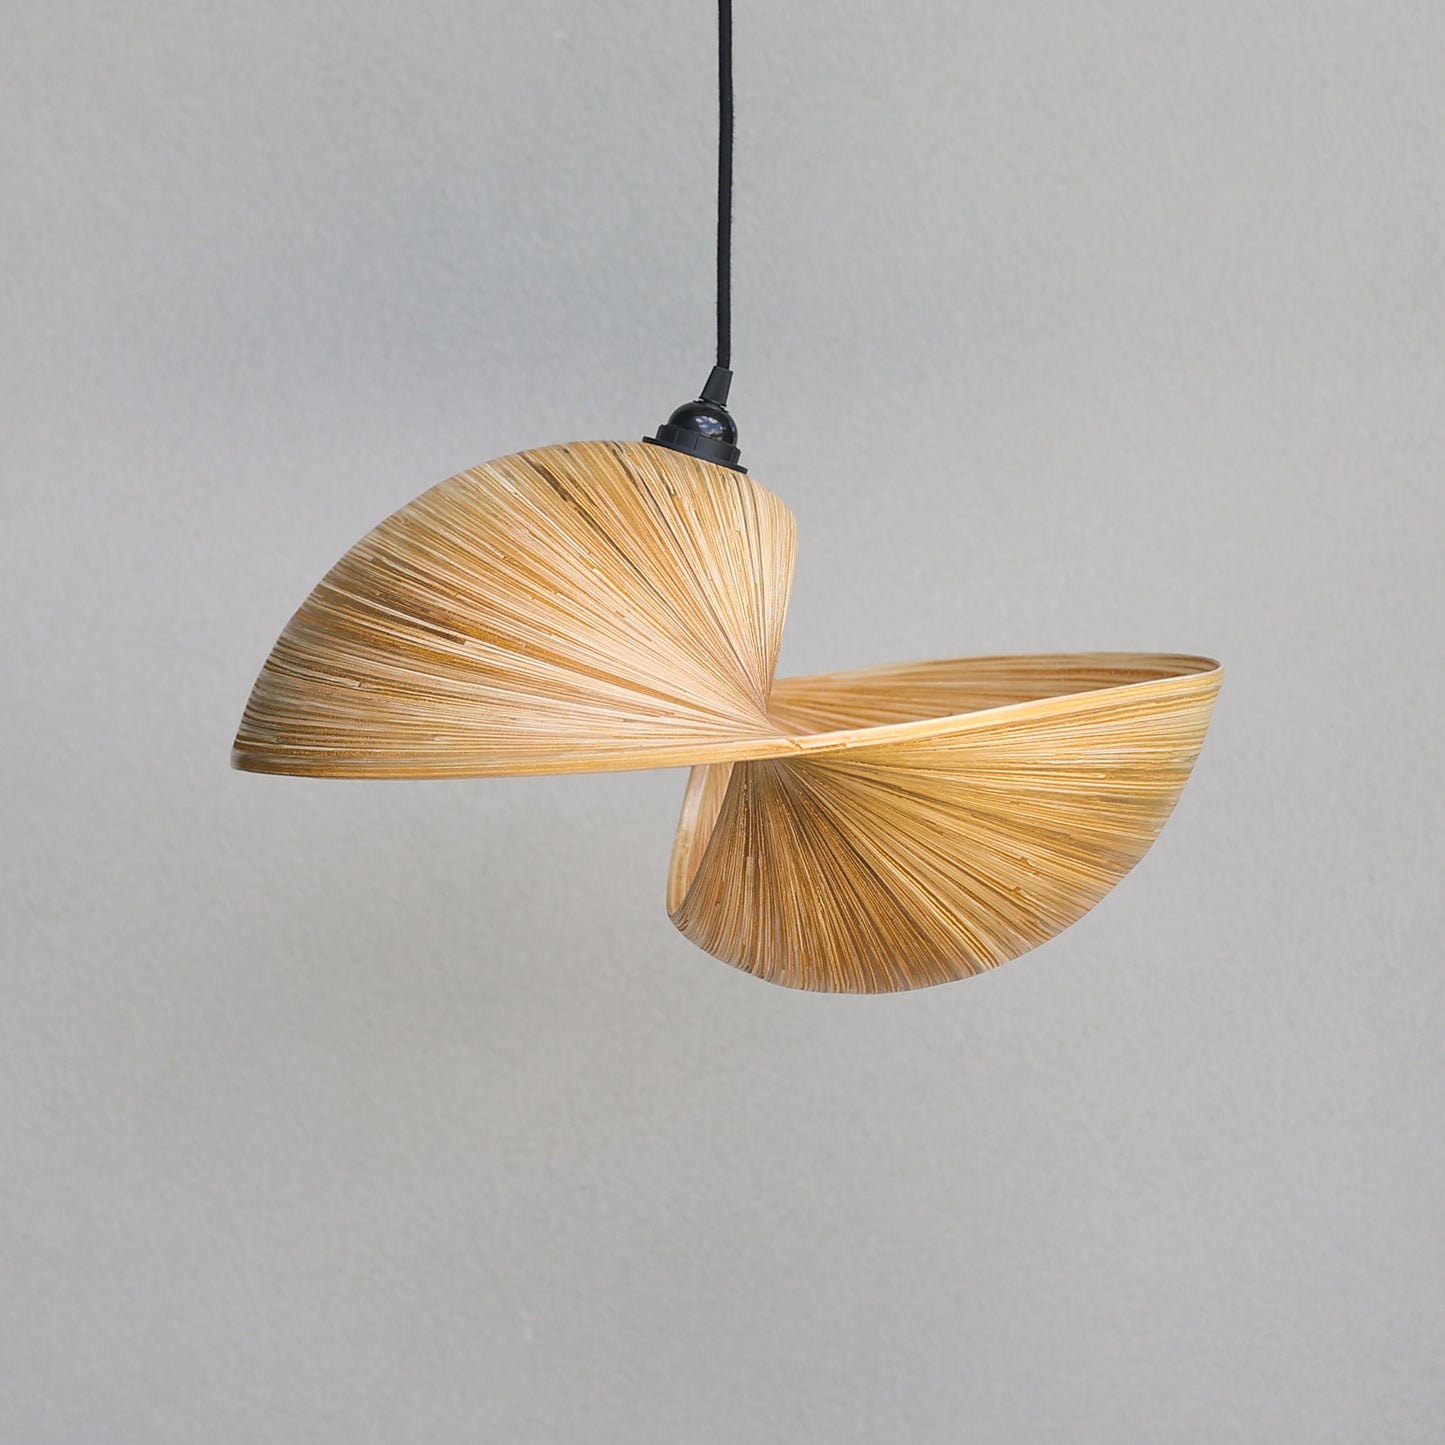 extra-large-bamboo-pendant-light-shade-made-from-thin-strips-of-bamboo-to-look-like-a-shell